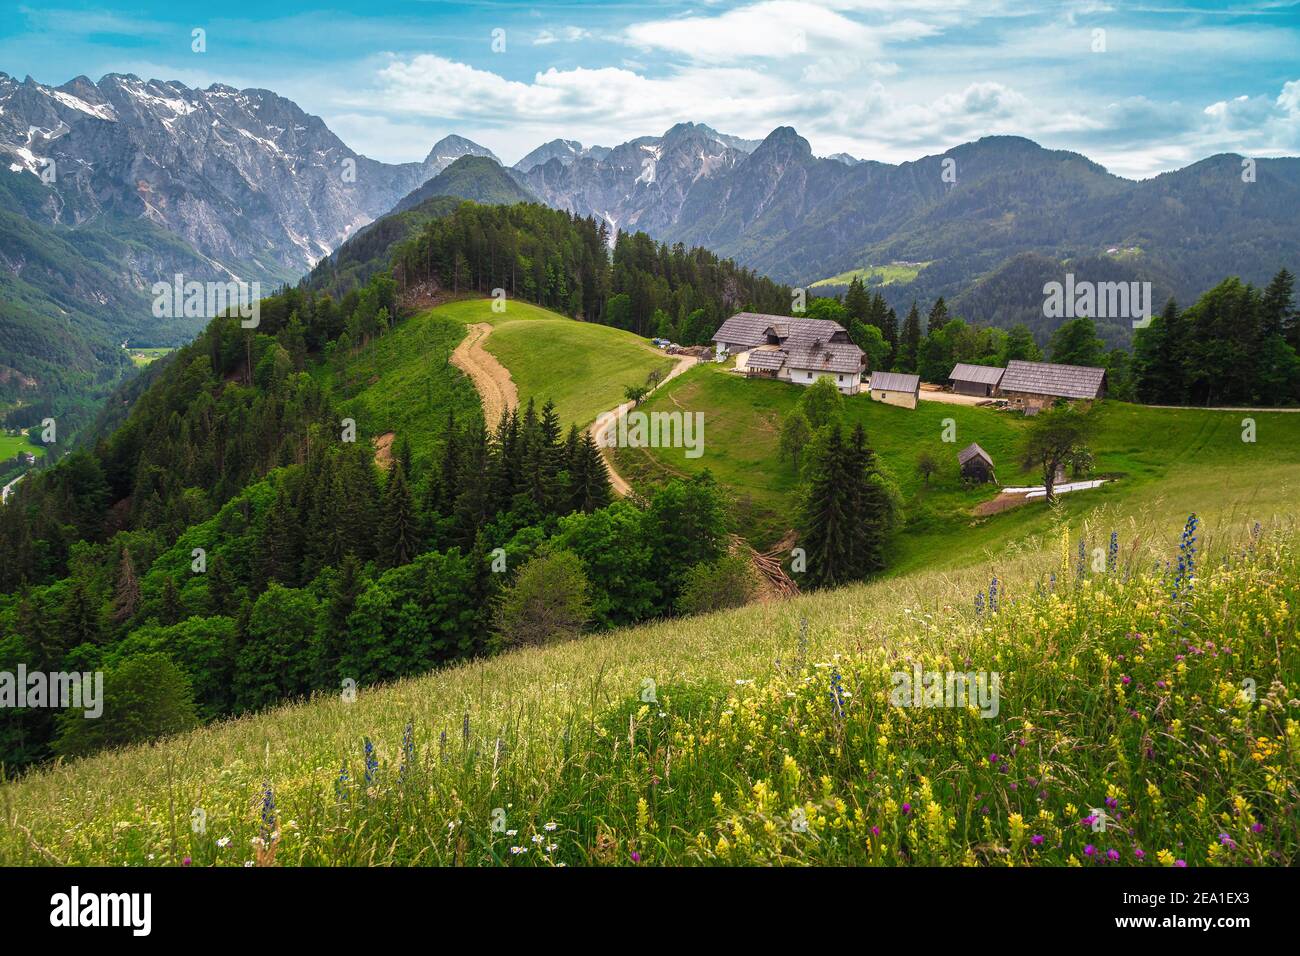 Stunning spring scenery with colorful various alpine flowers and snowy mountains in background, Logarska Dolina (Logar valley), Slovenia, Europe Stock Photo